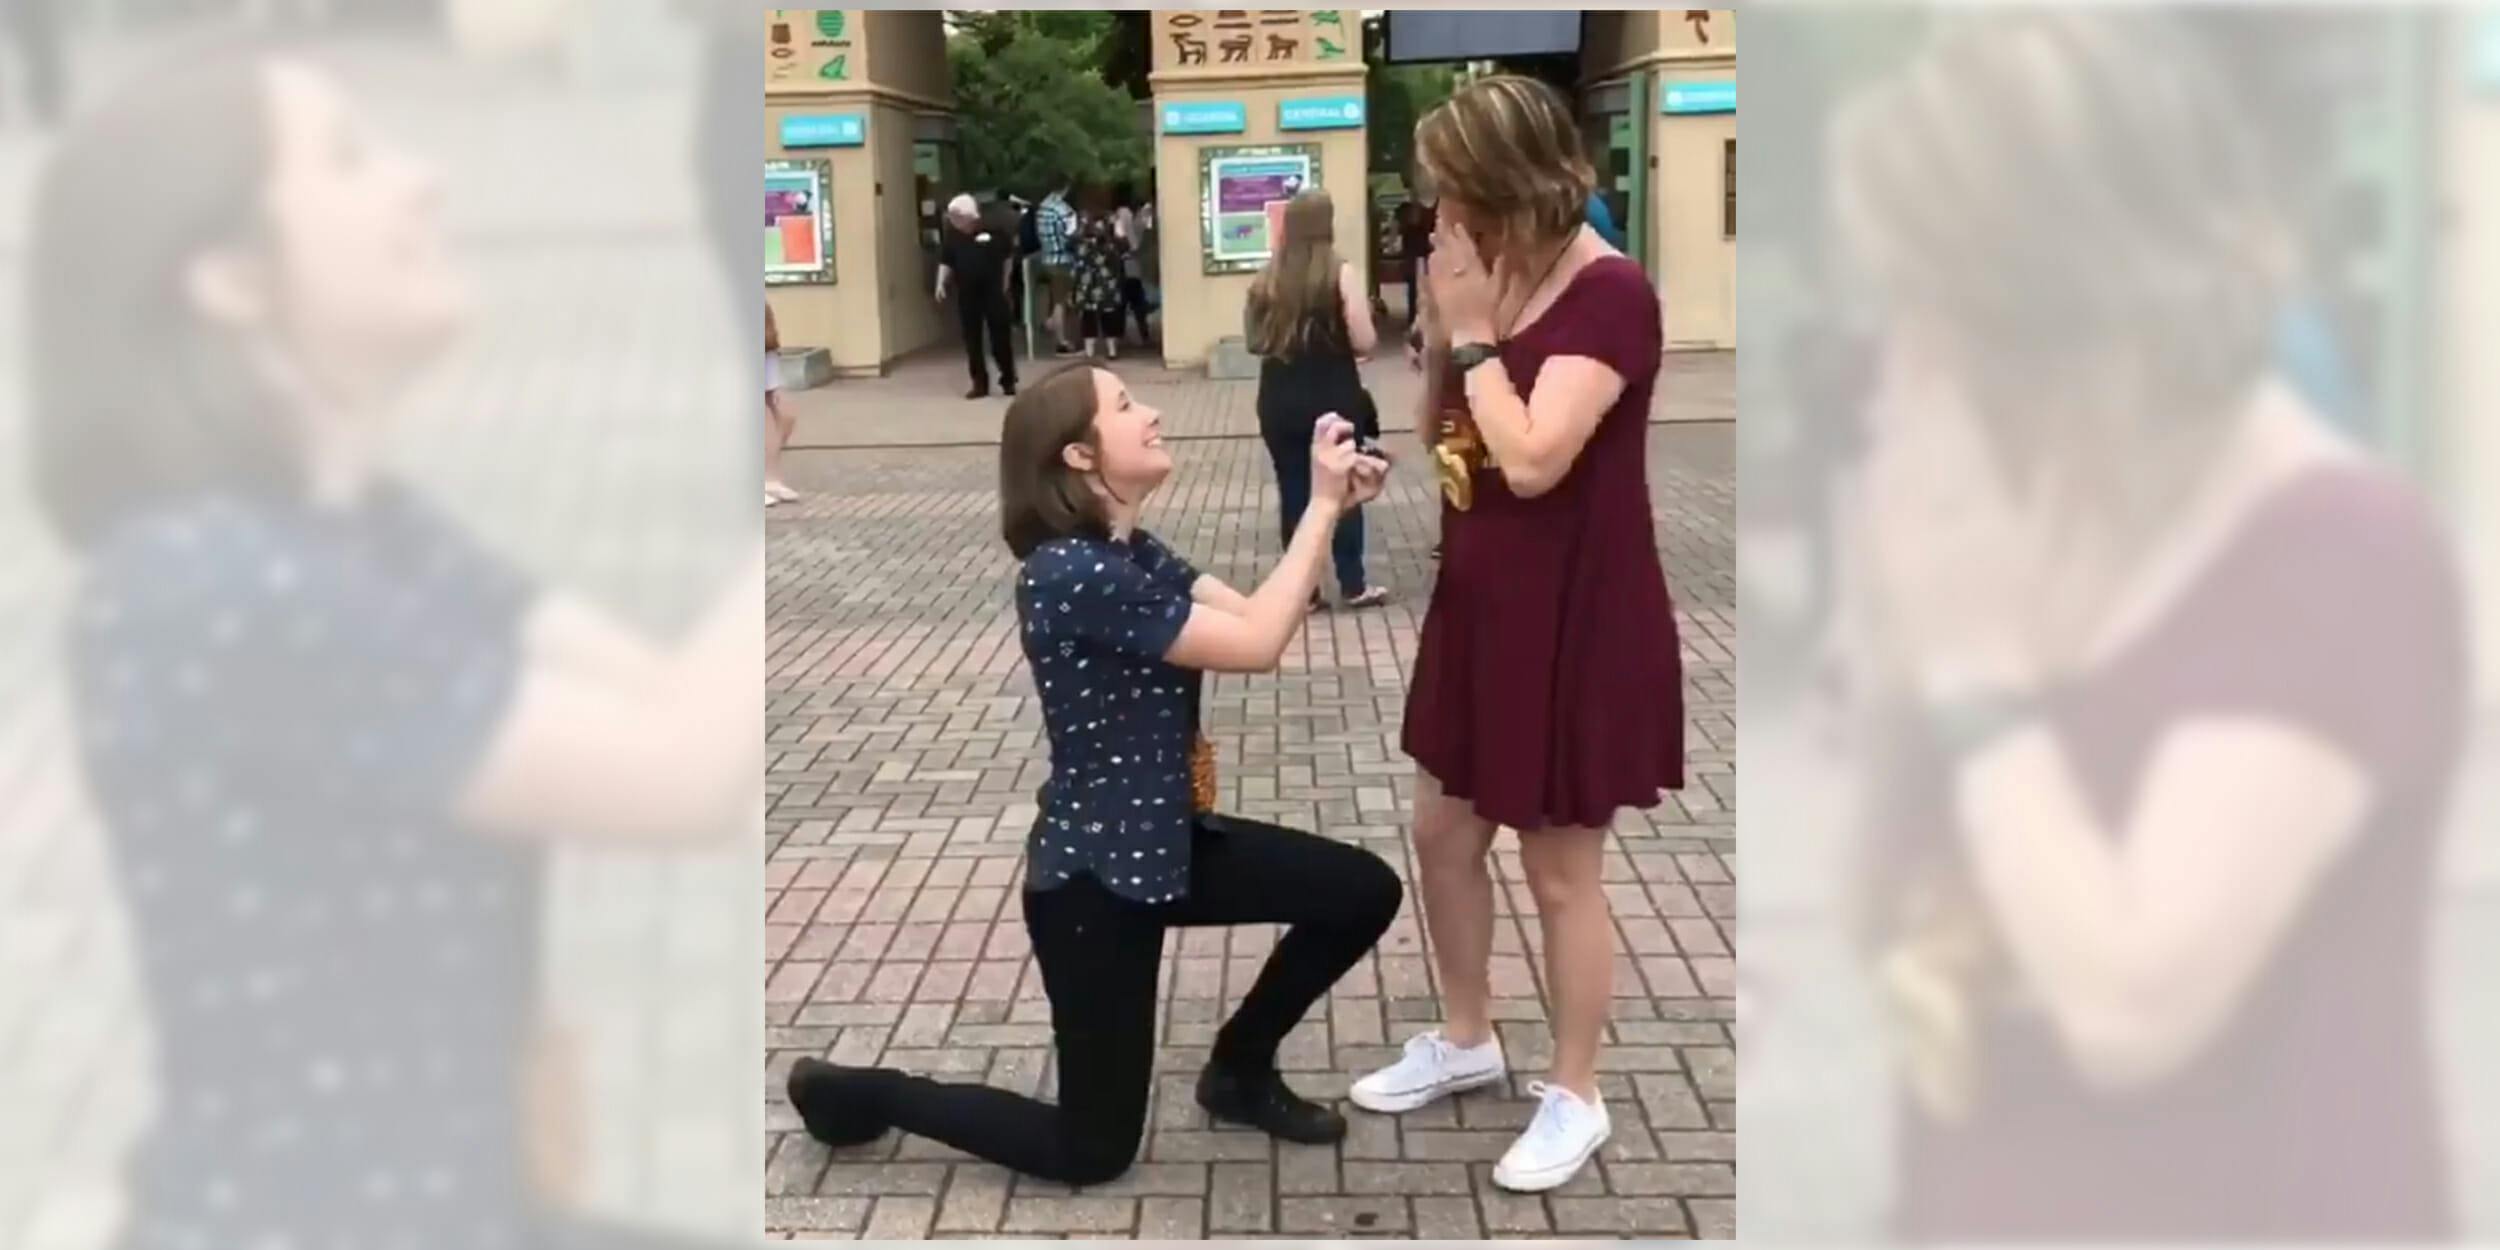 Lesbian Goes Viral for Proposing Each Other at the Same Time